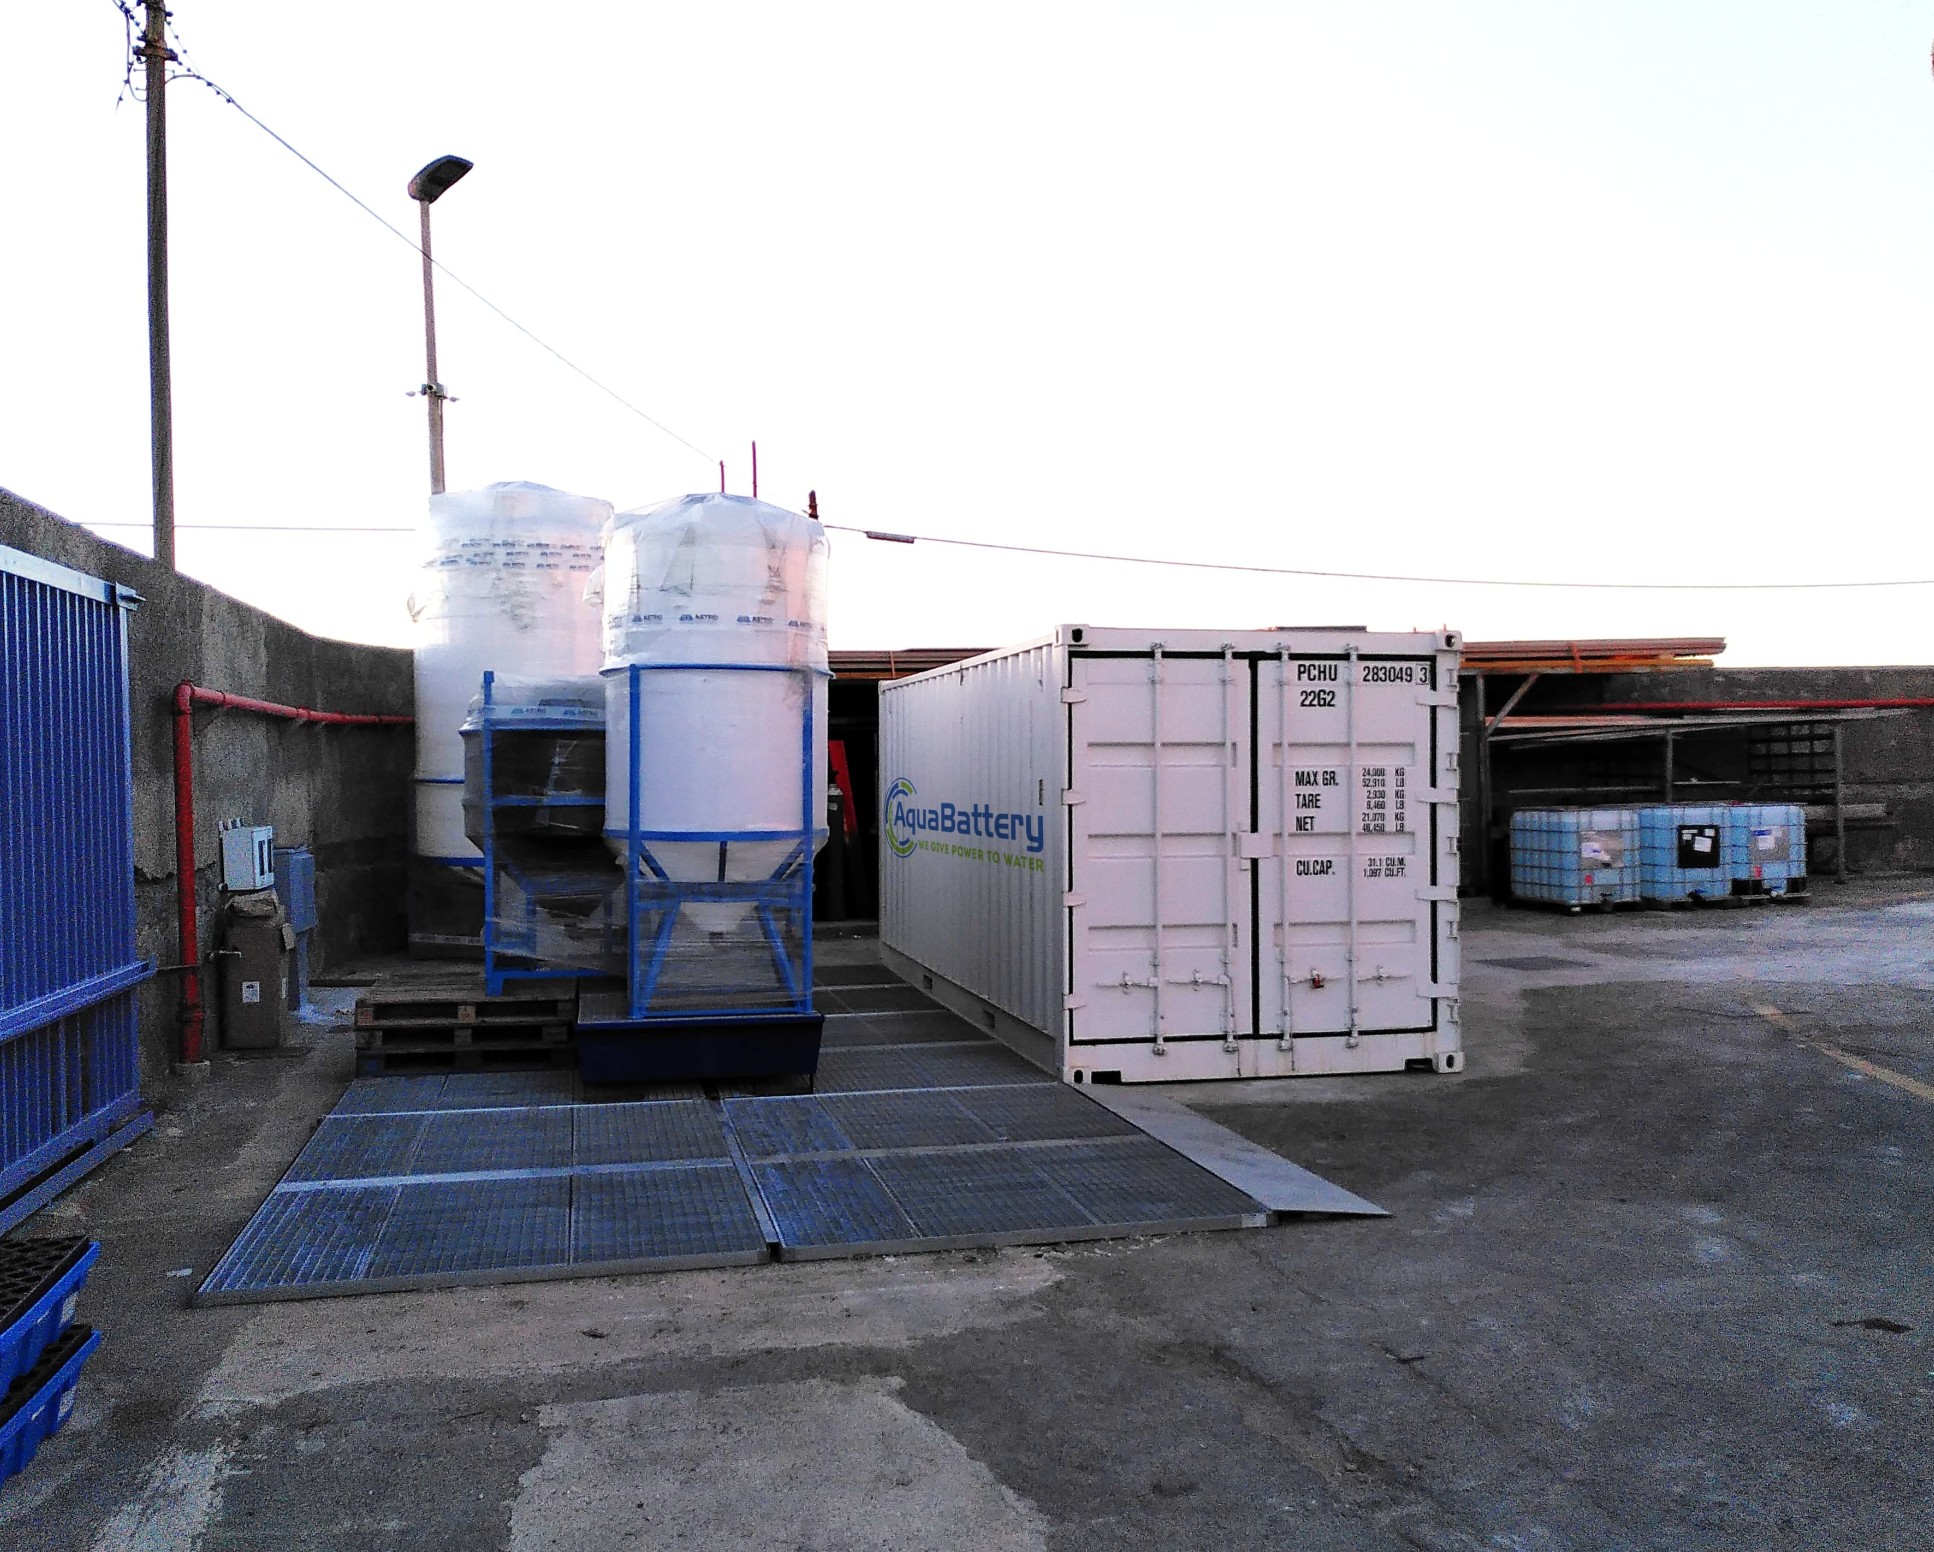 A shipping container and water tank